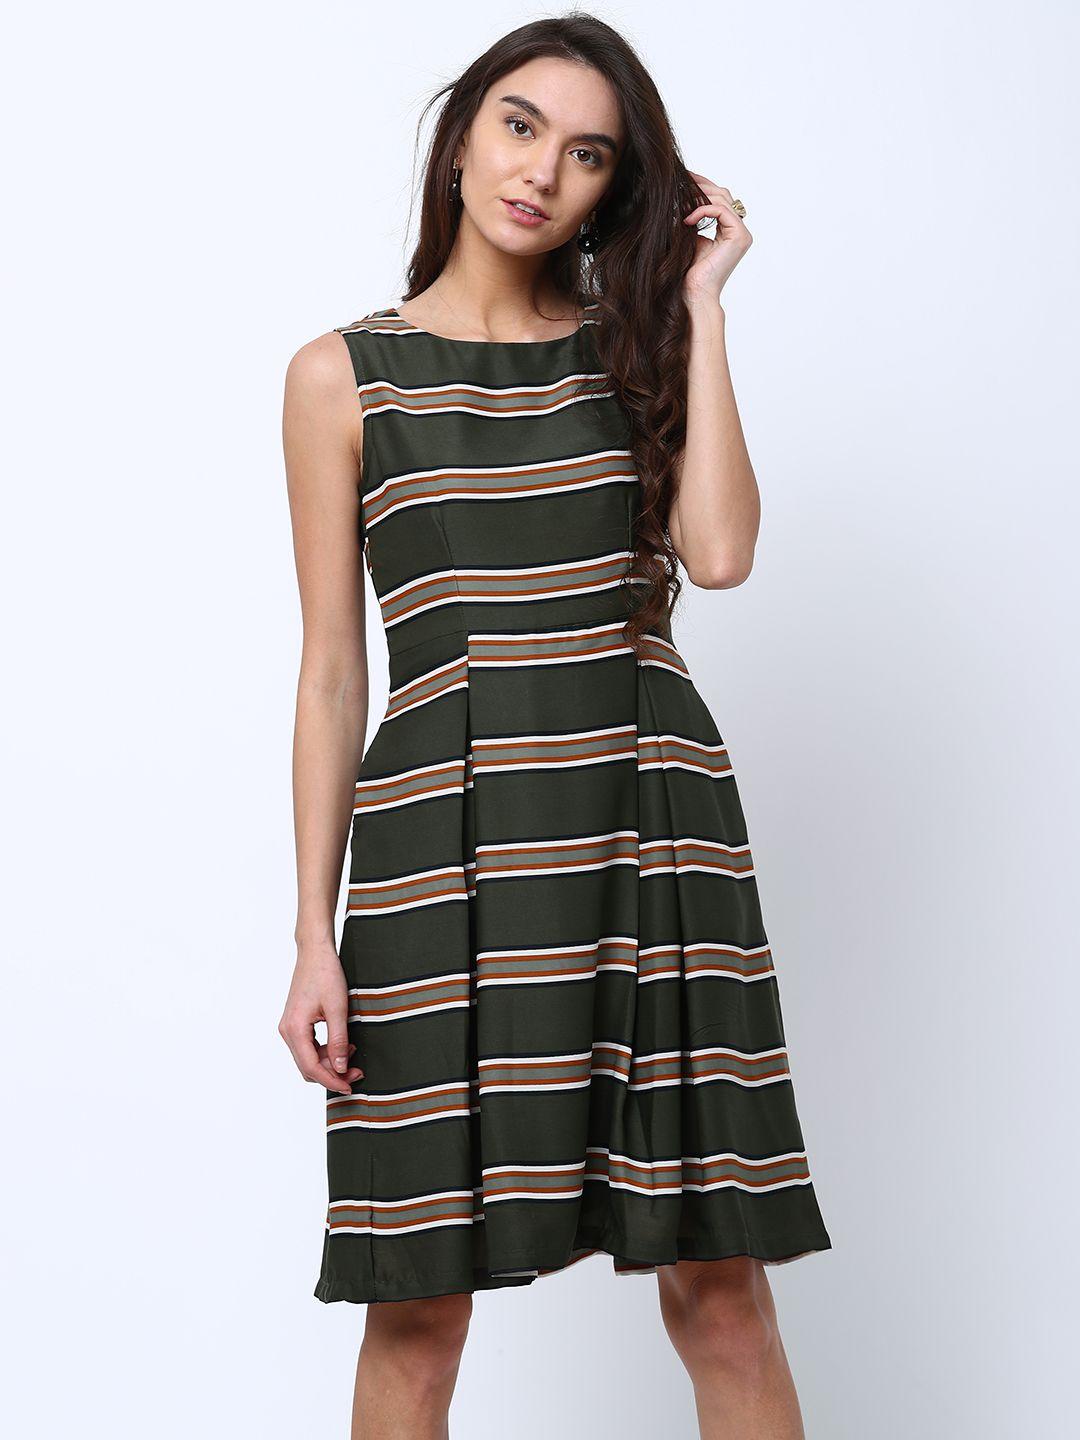 tokyo talkies women olive green striped fit and flare dress